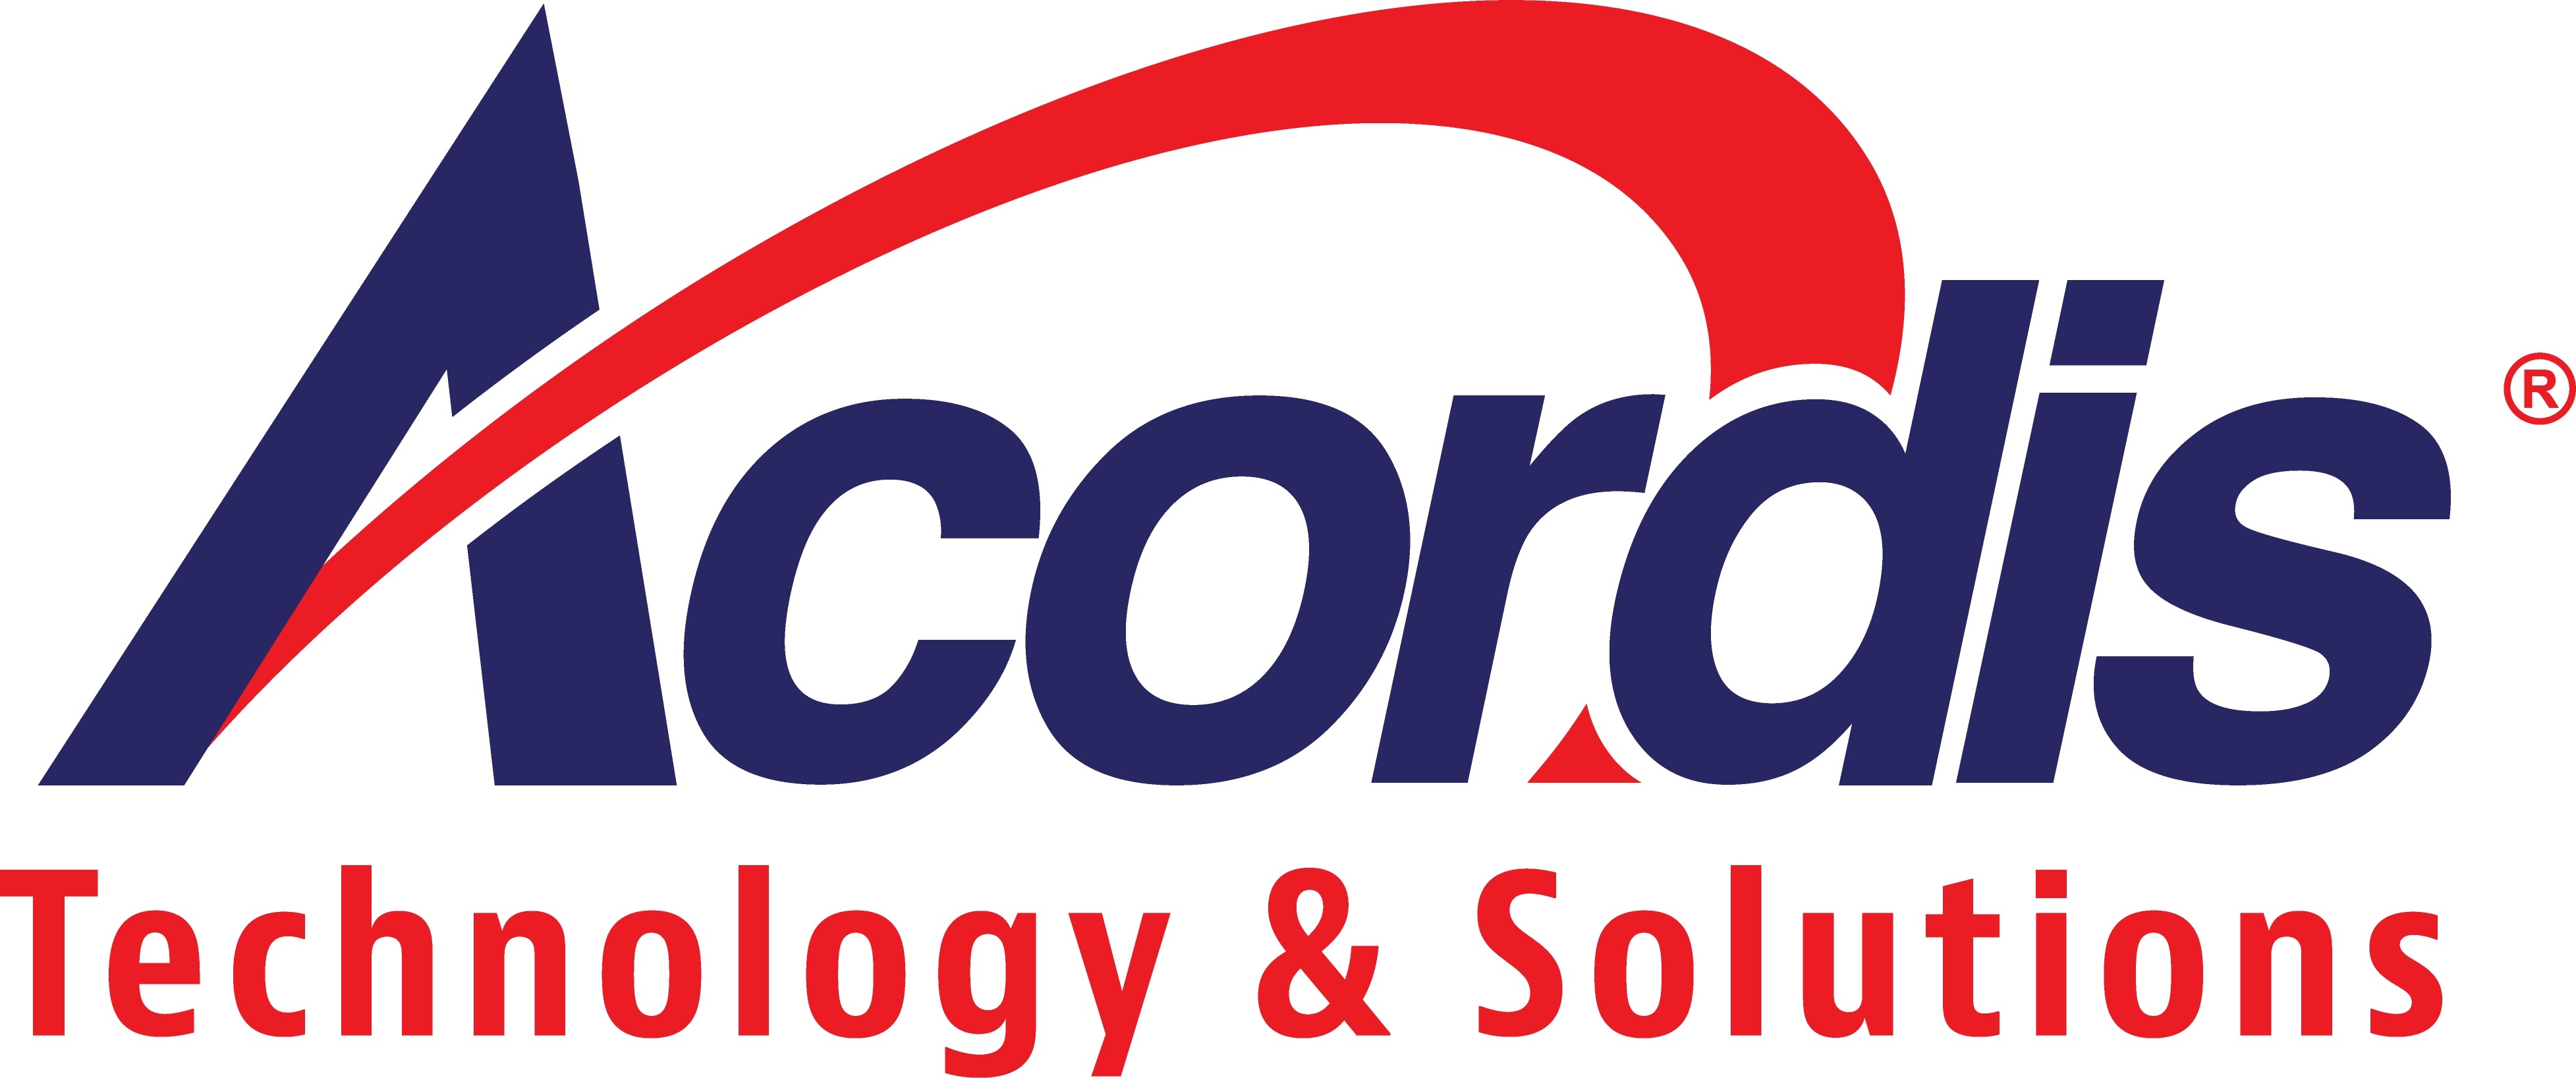 Acordis Technology And Solutions